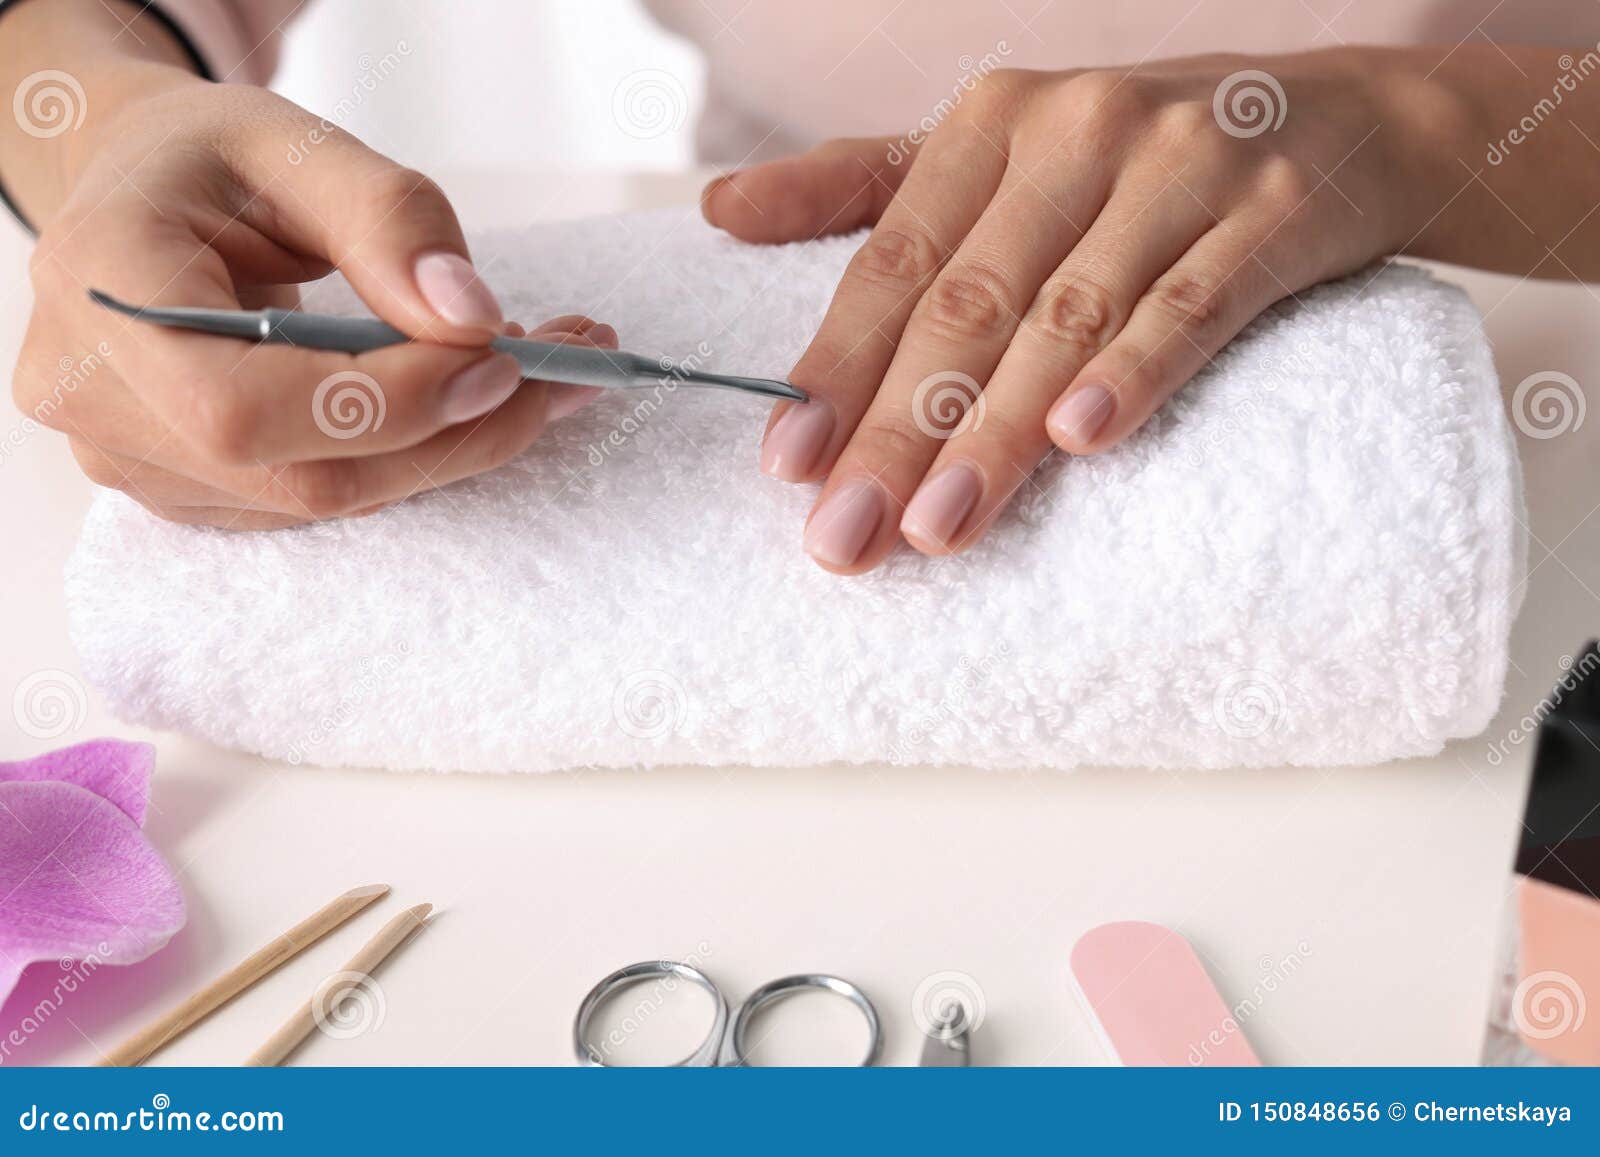 woman preparing fingernail cuticles at table. at-home manicure